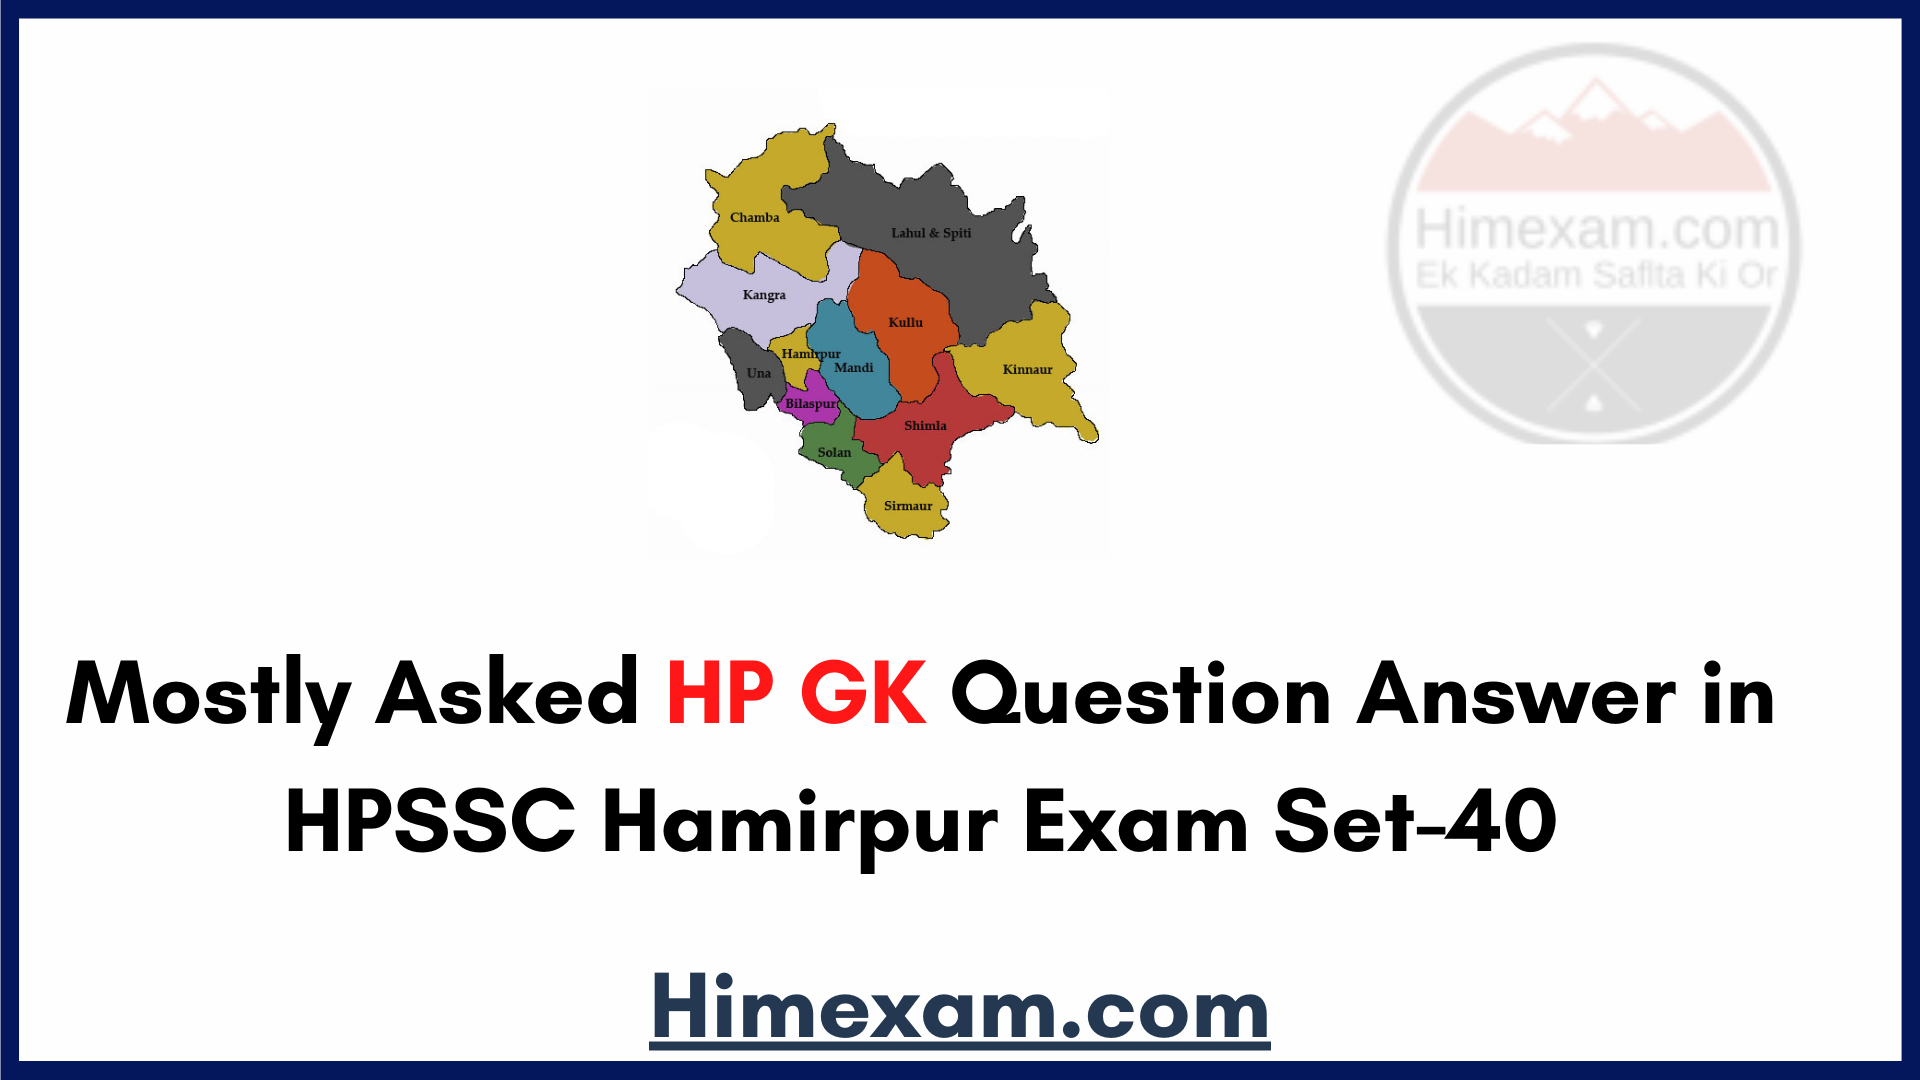 Mostly Asked HP GK Question Answer in HPSSC Hamirpur Exam Set-40